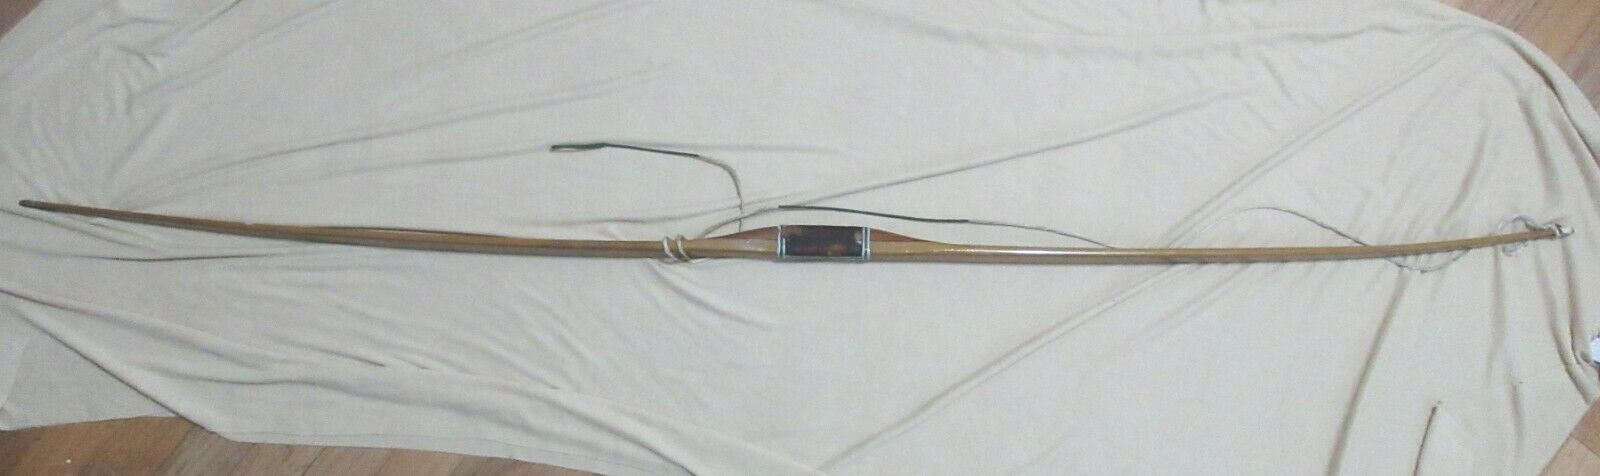 VINTAGE INDIAN ARCHERY WOOD BOW 62 INCHES